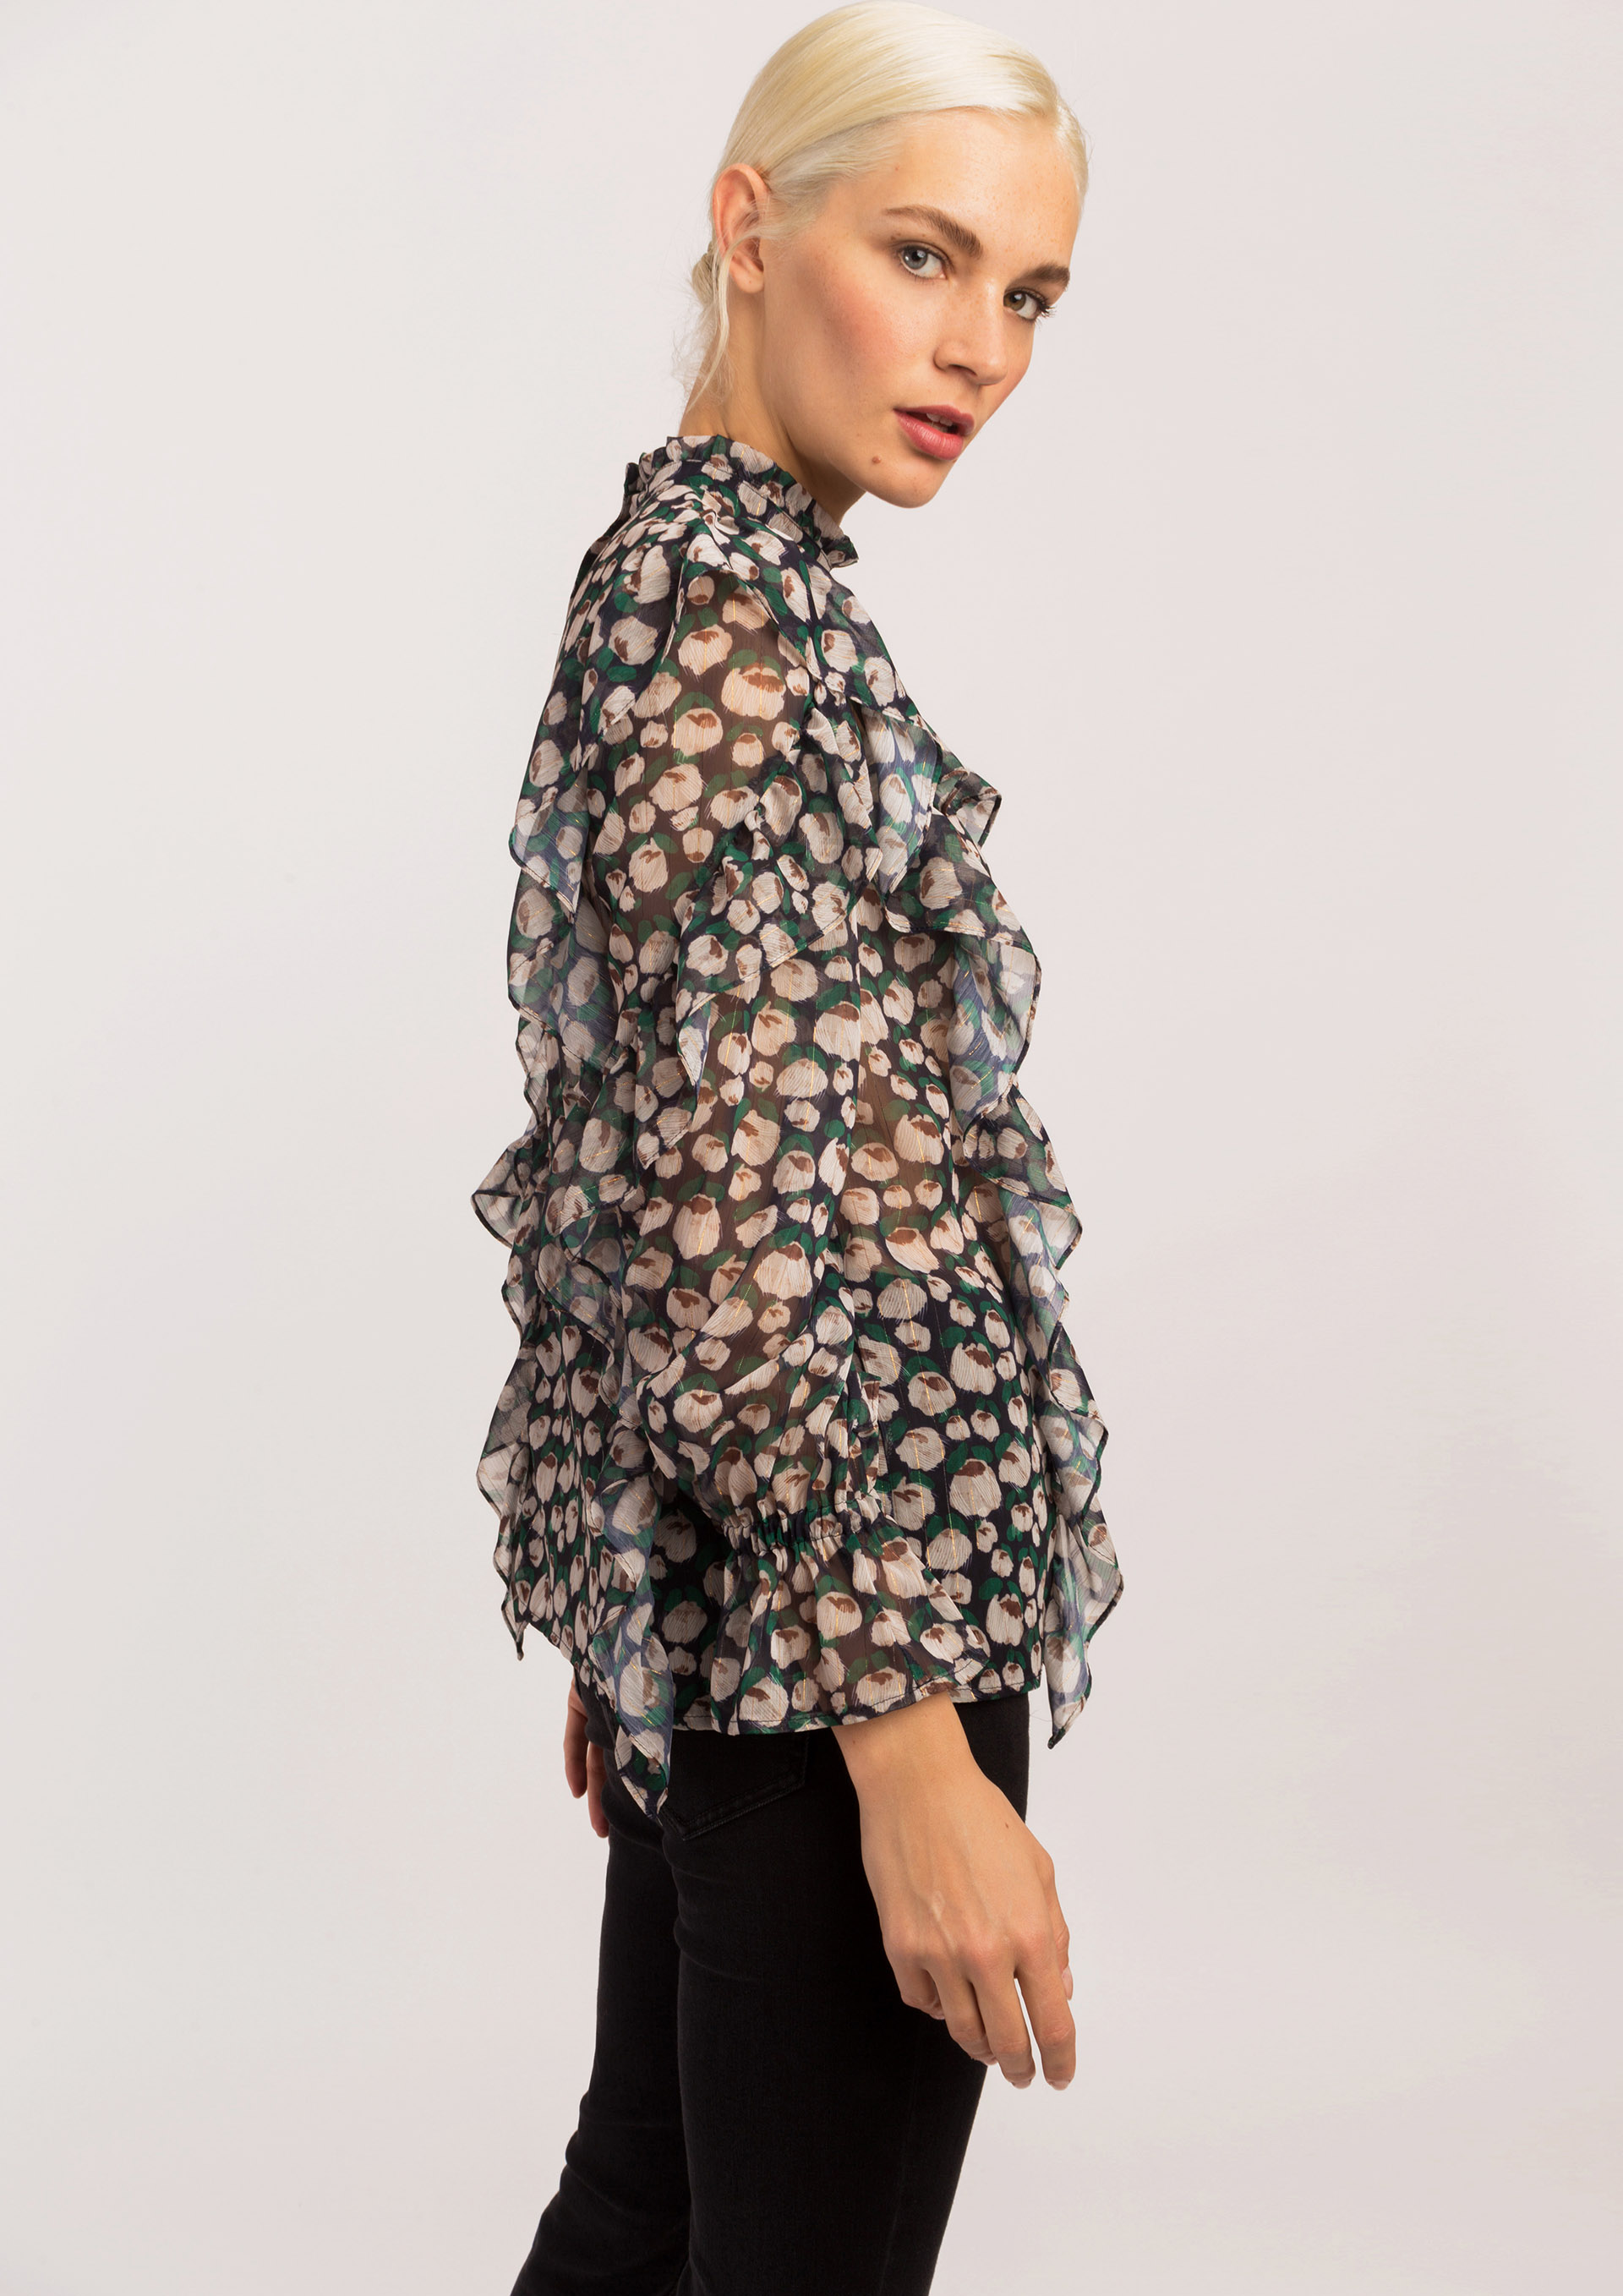 Muslin blouse with floral print.